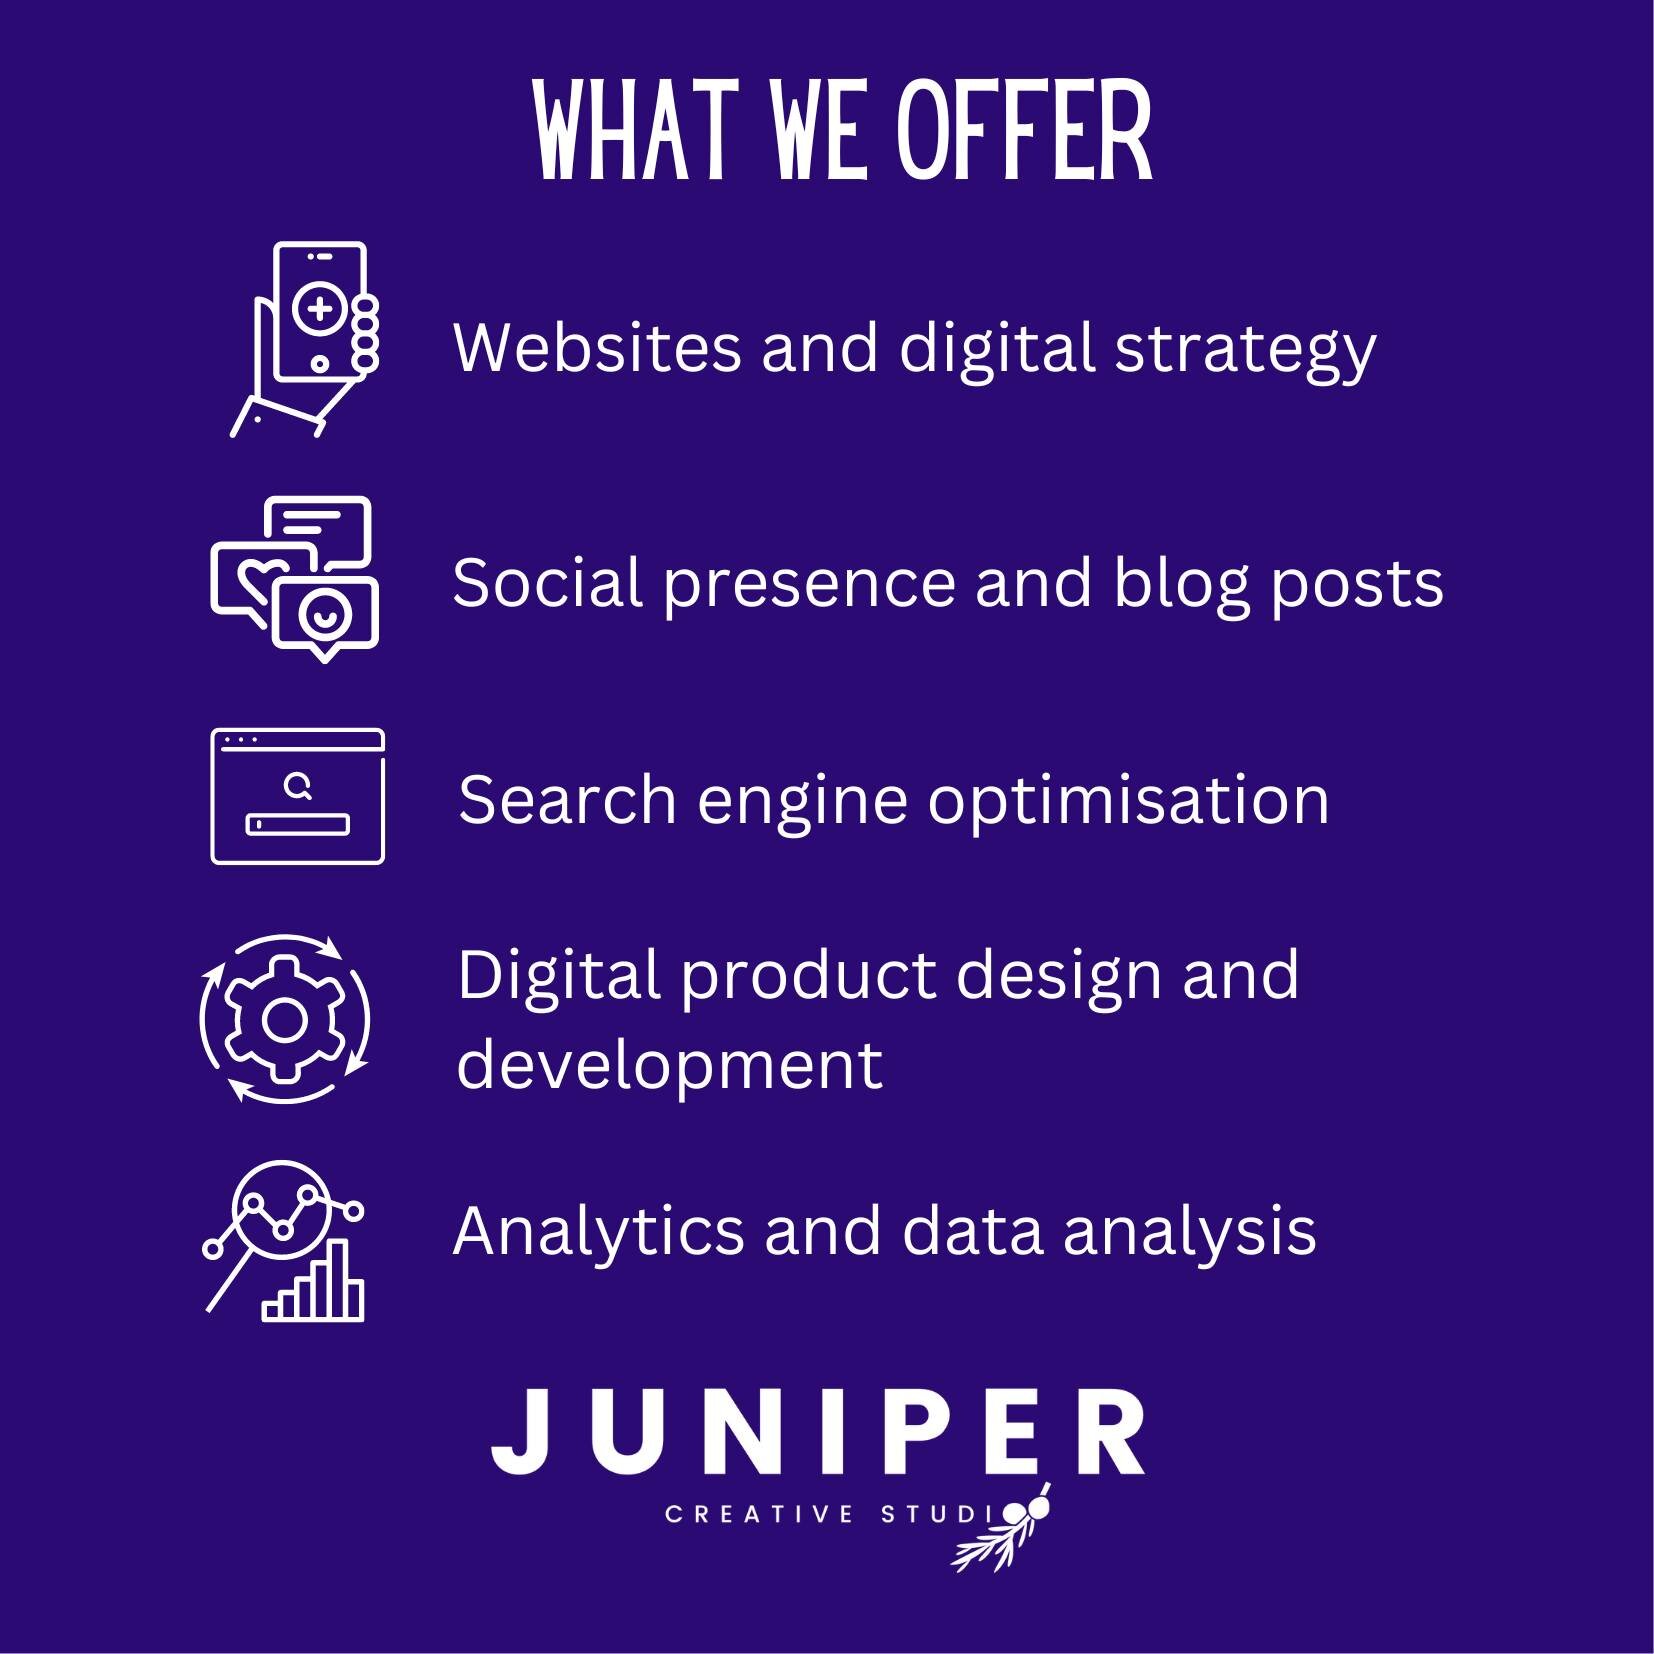 Need some help with your digital strategy or even to develop your product offering? We can put together a package to suit your needs. Get in touch for a chat to find out more! #digitalstrategy #productdevelopment #website #Analytics #blog